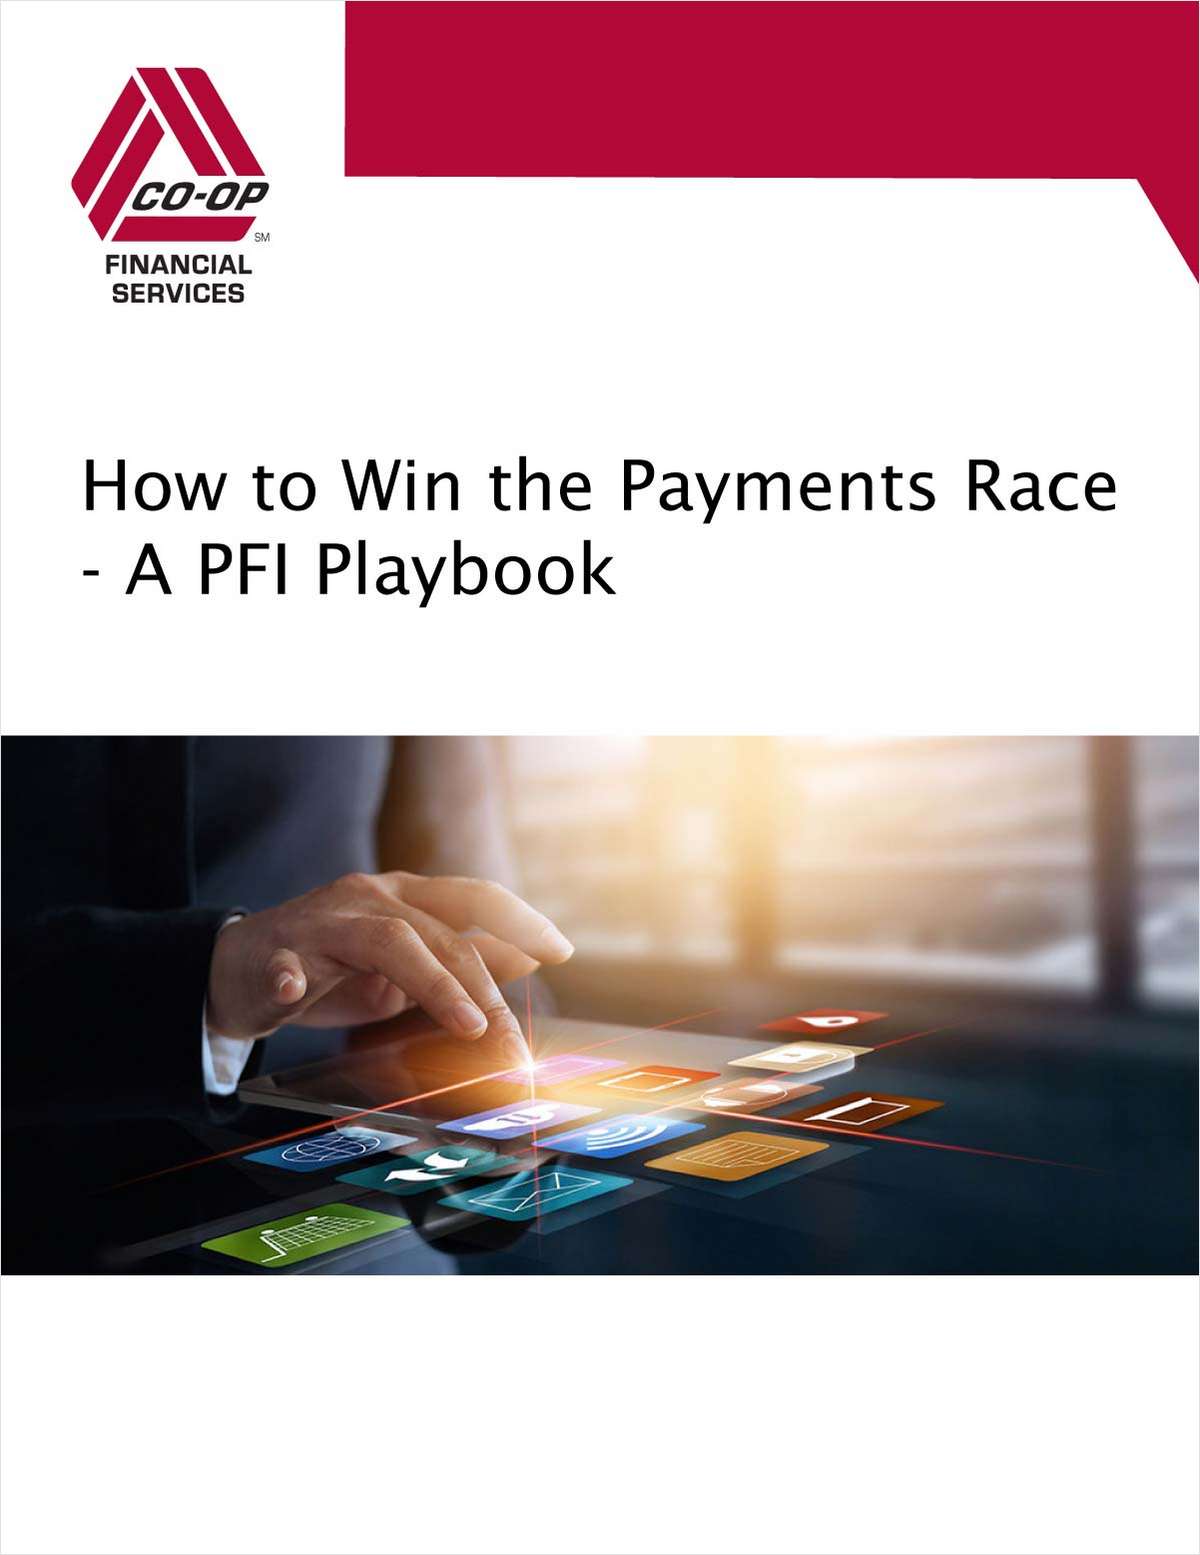 How to Win the Payments Race - a PFI Playbook